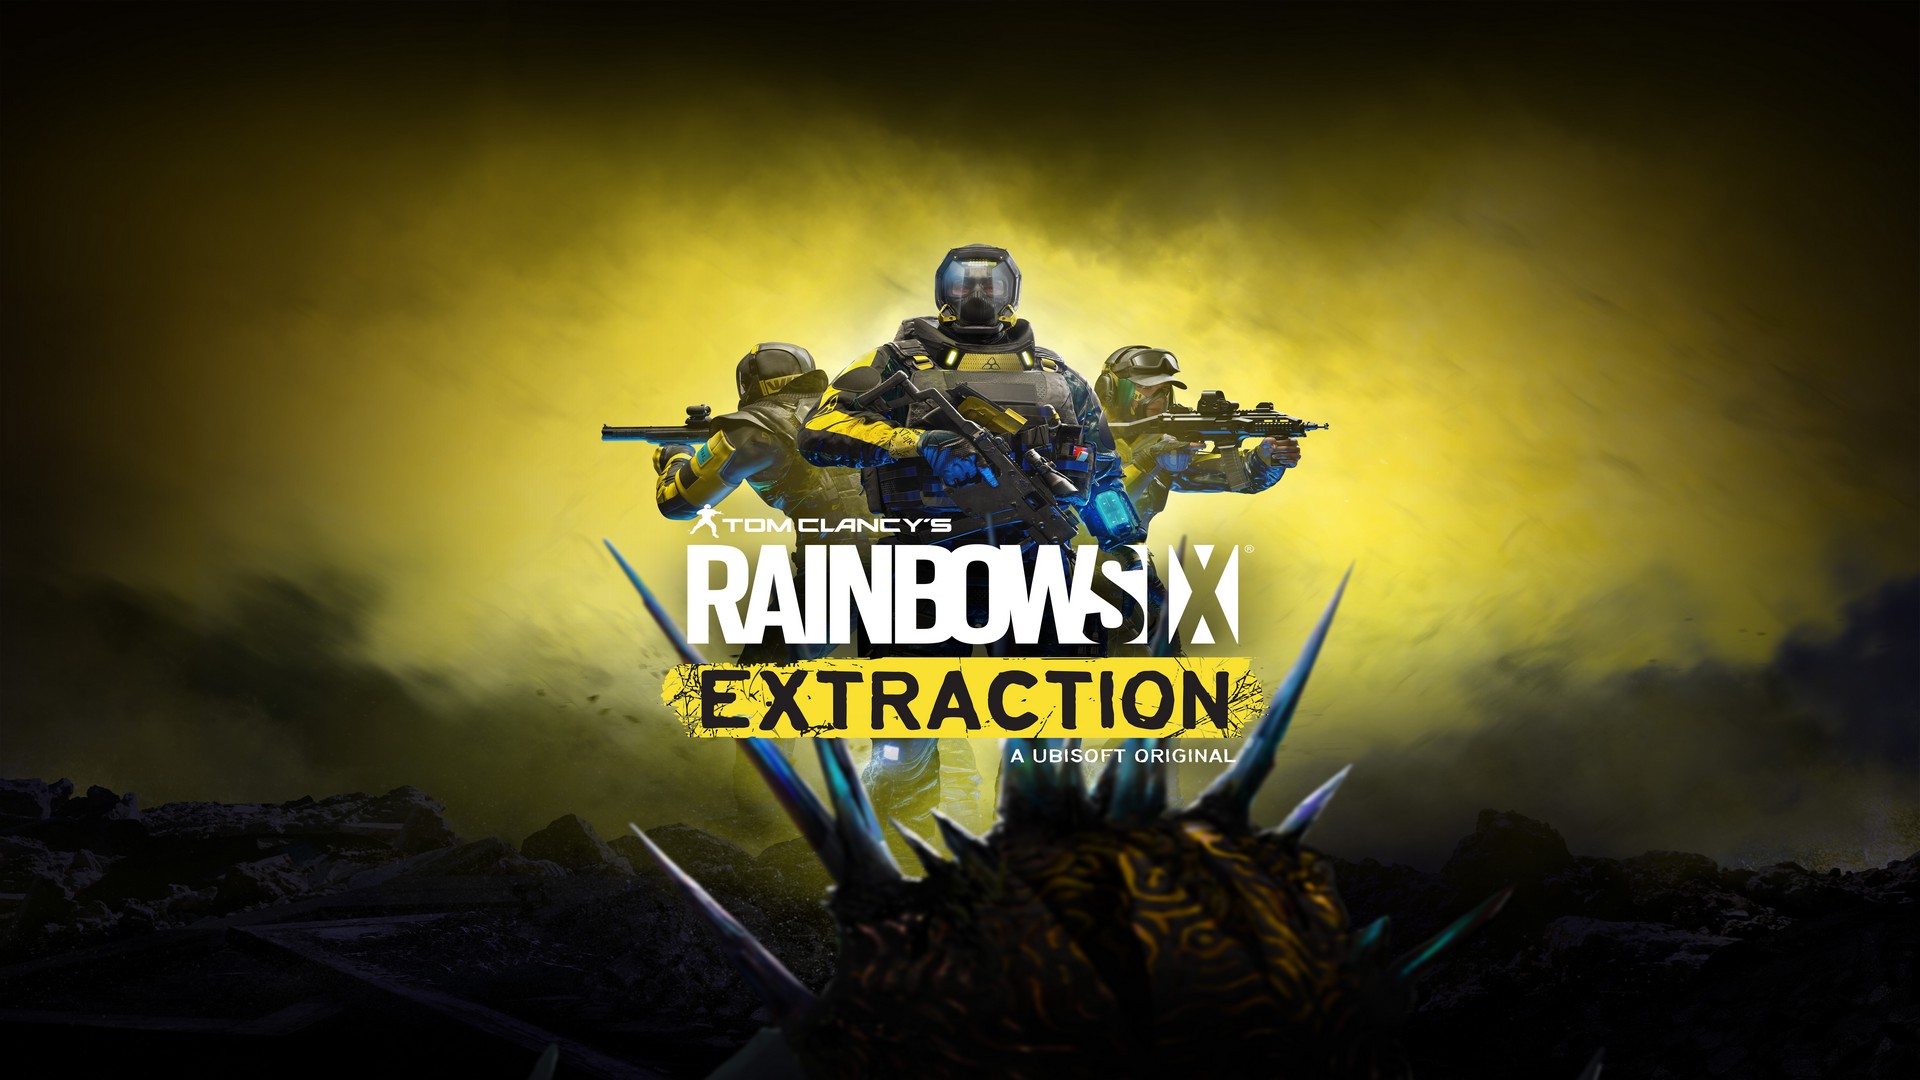 Tom Clancy’s Rainbow Six Extraction Launches On September 16